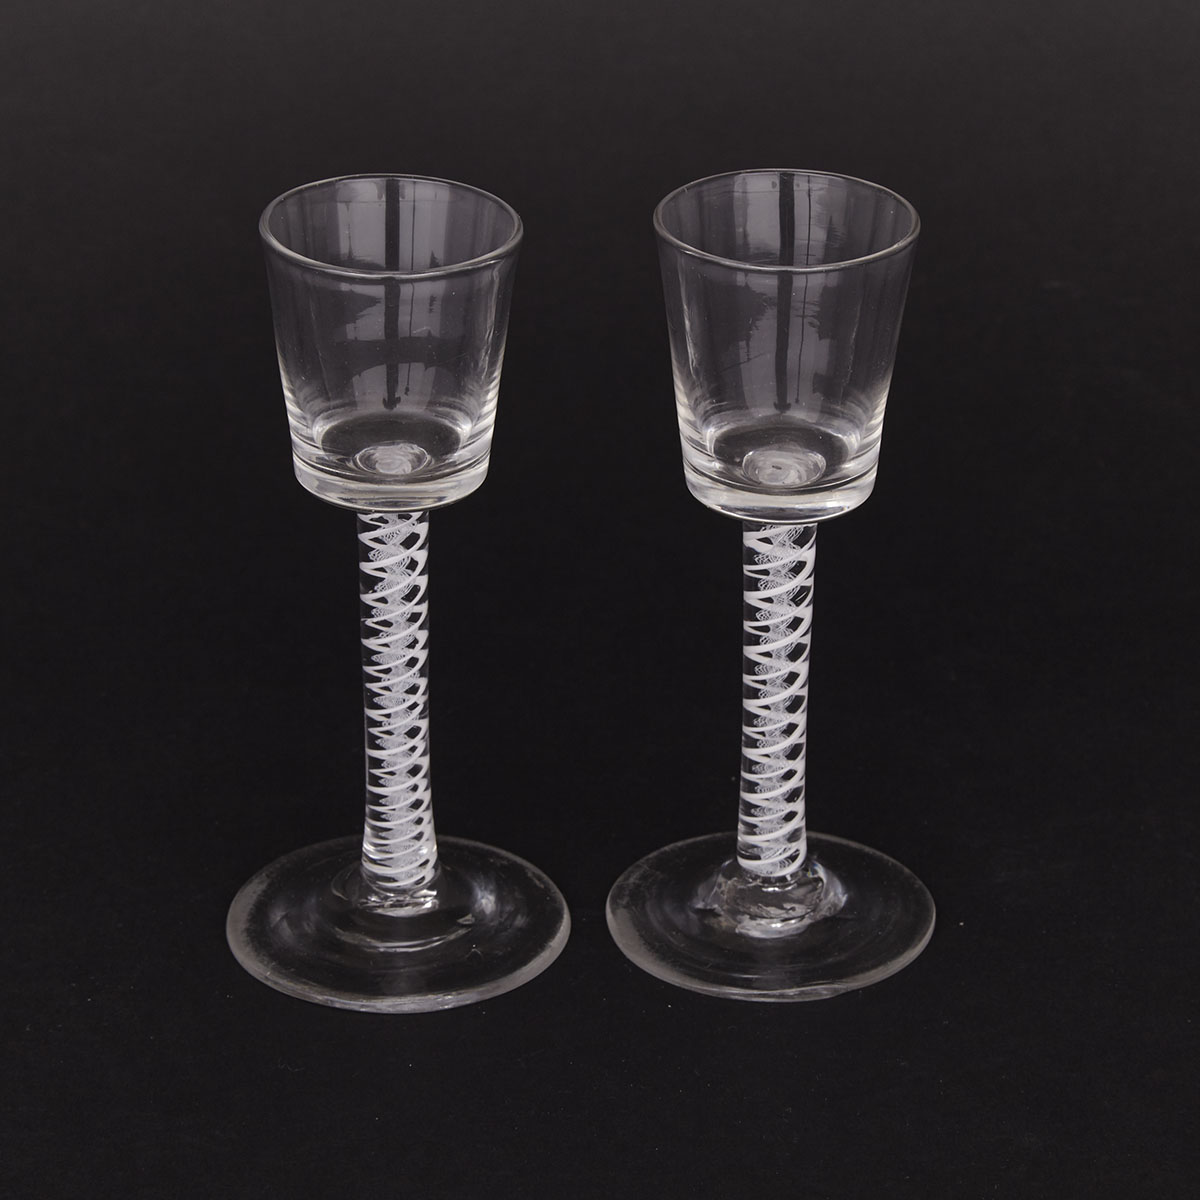 Pair of English Opaque Twist Stemmed Wine Glasses, 18th century